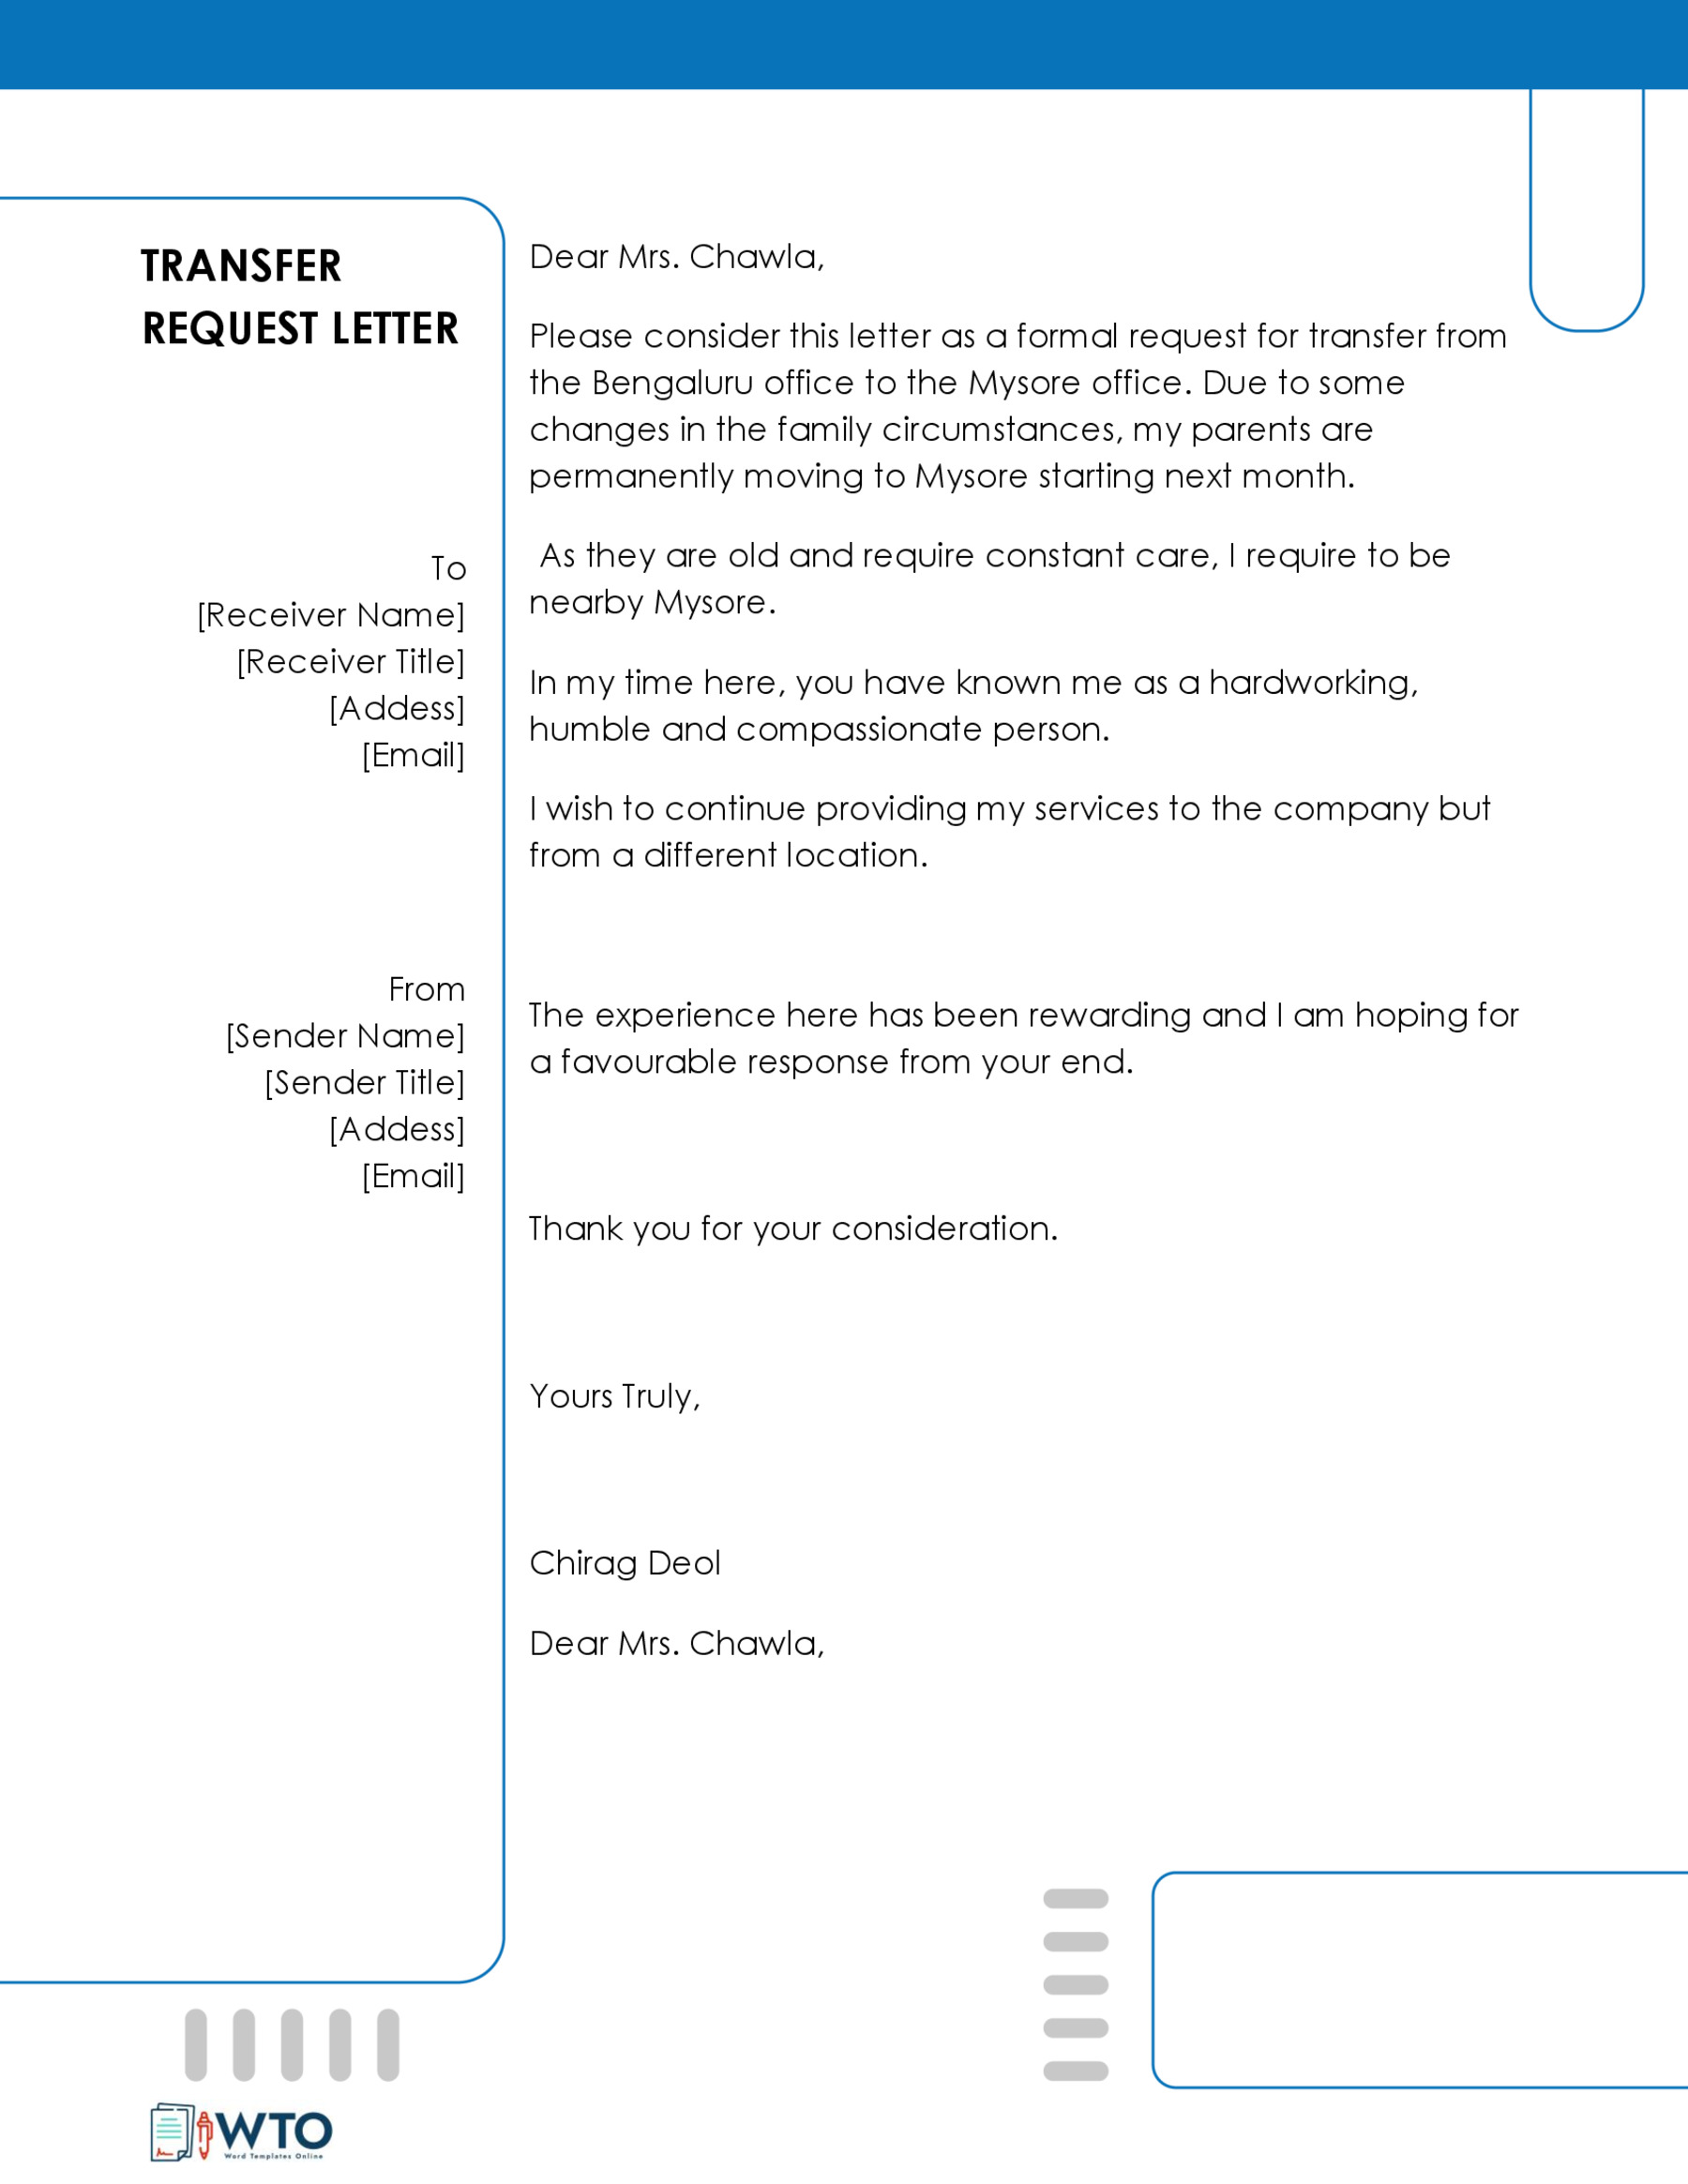 Free Editable Transfer Request Letter Sample 11 in Word Format